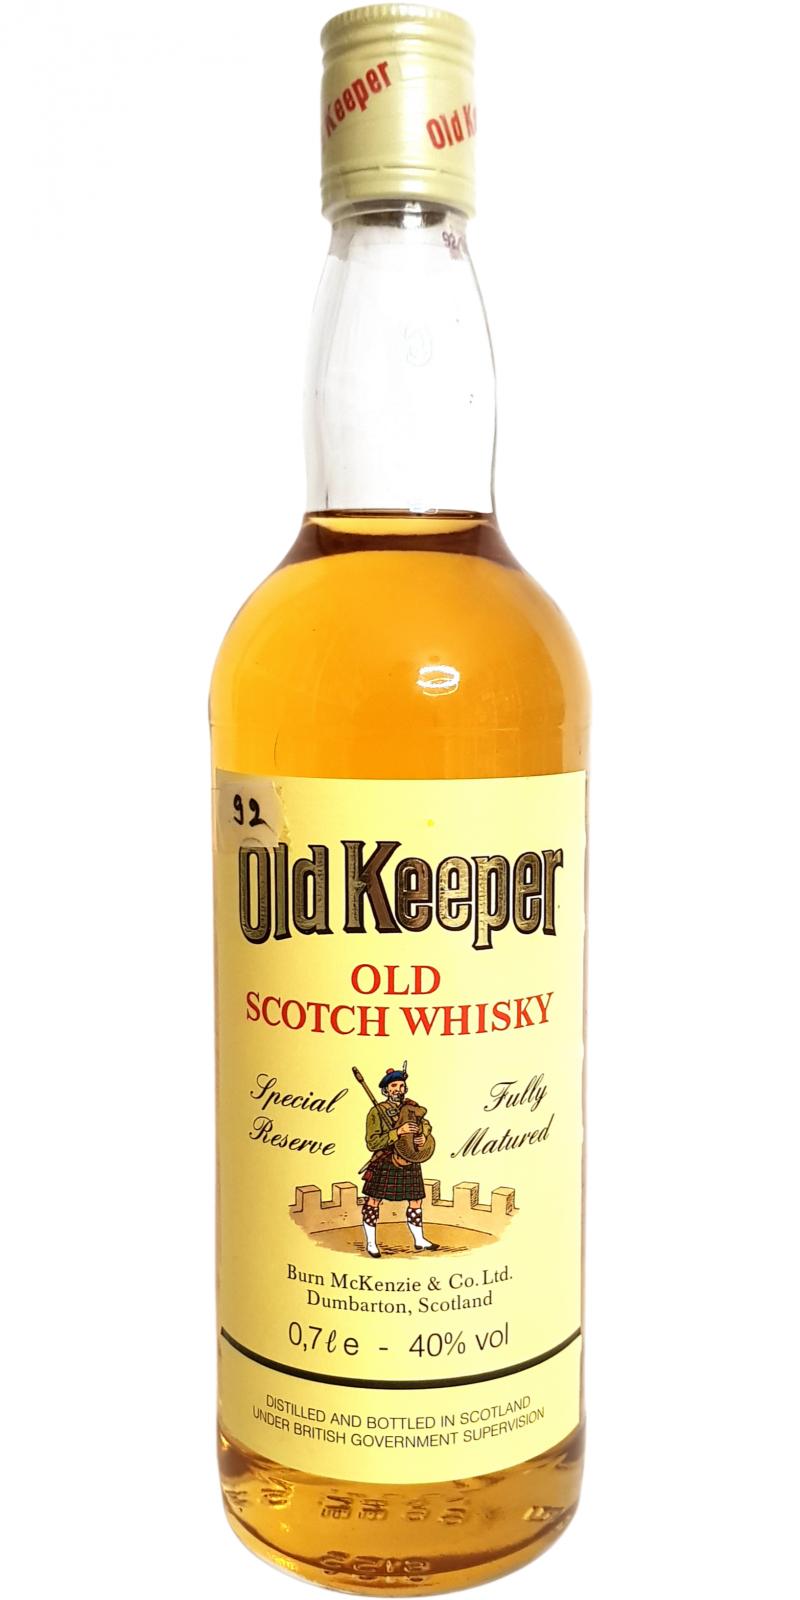 Old Keeper Old Scotch Whisky Special Reserve 40% 700ml